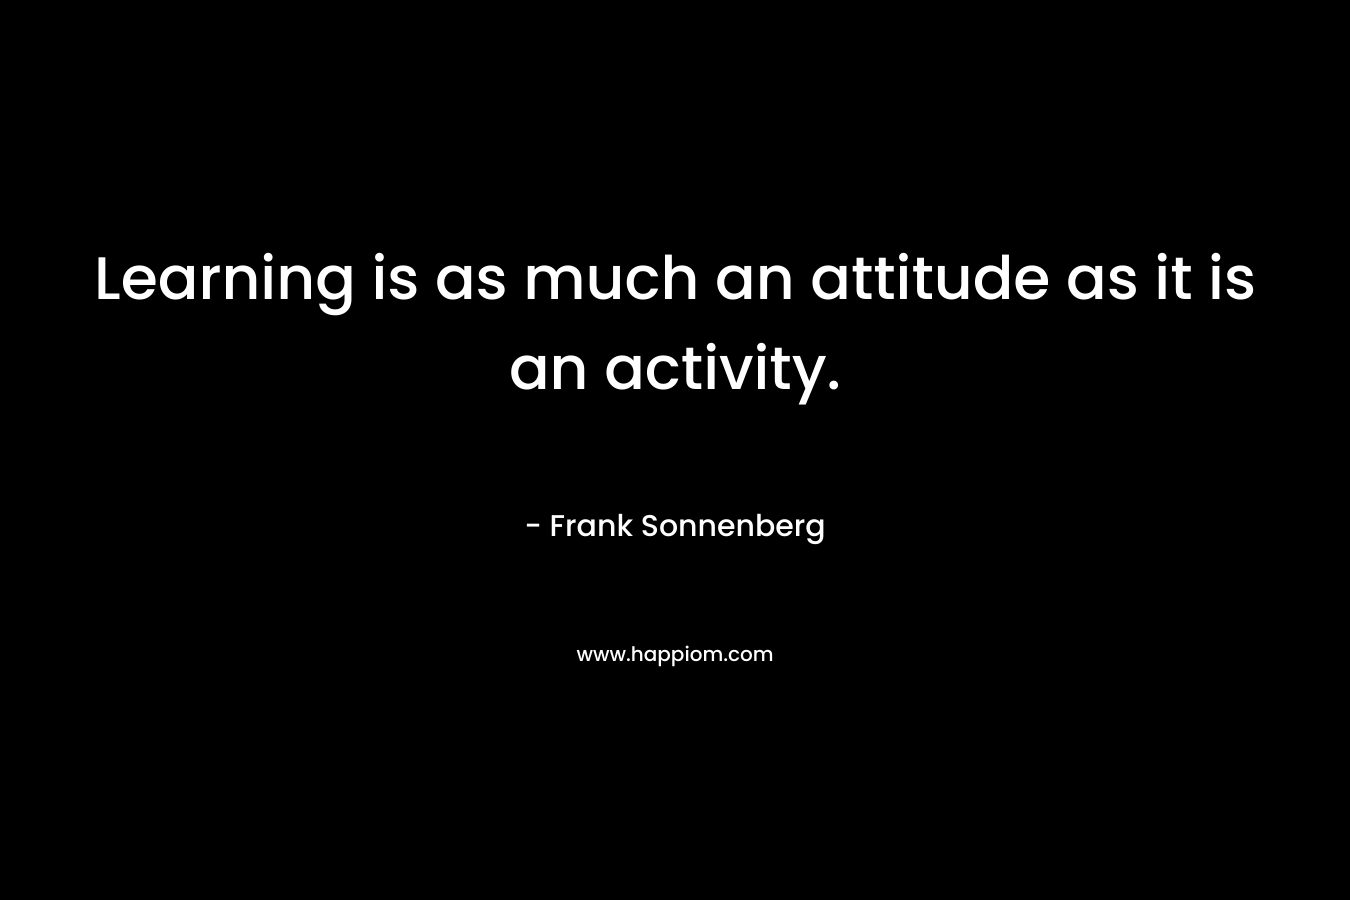 Learning is as much an attitude as it is an activity.